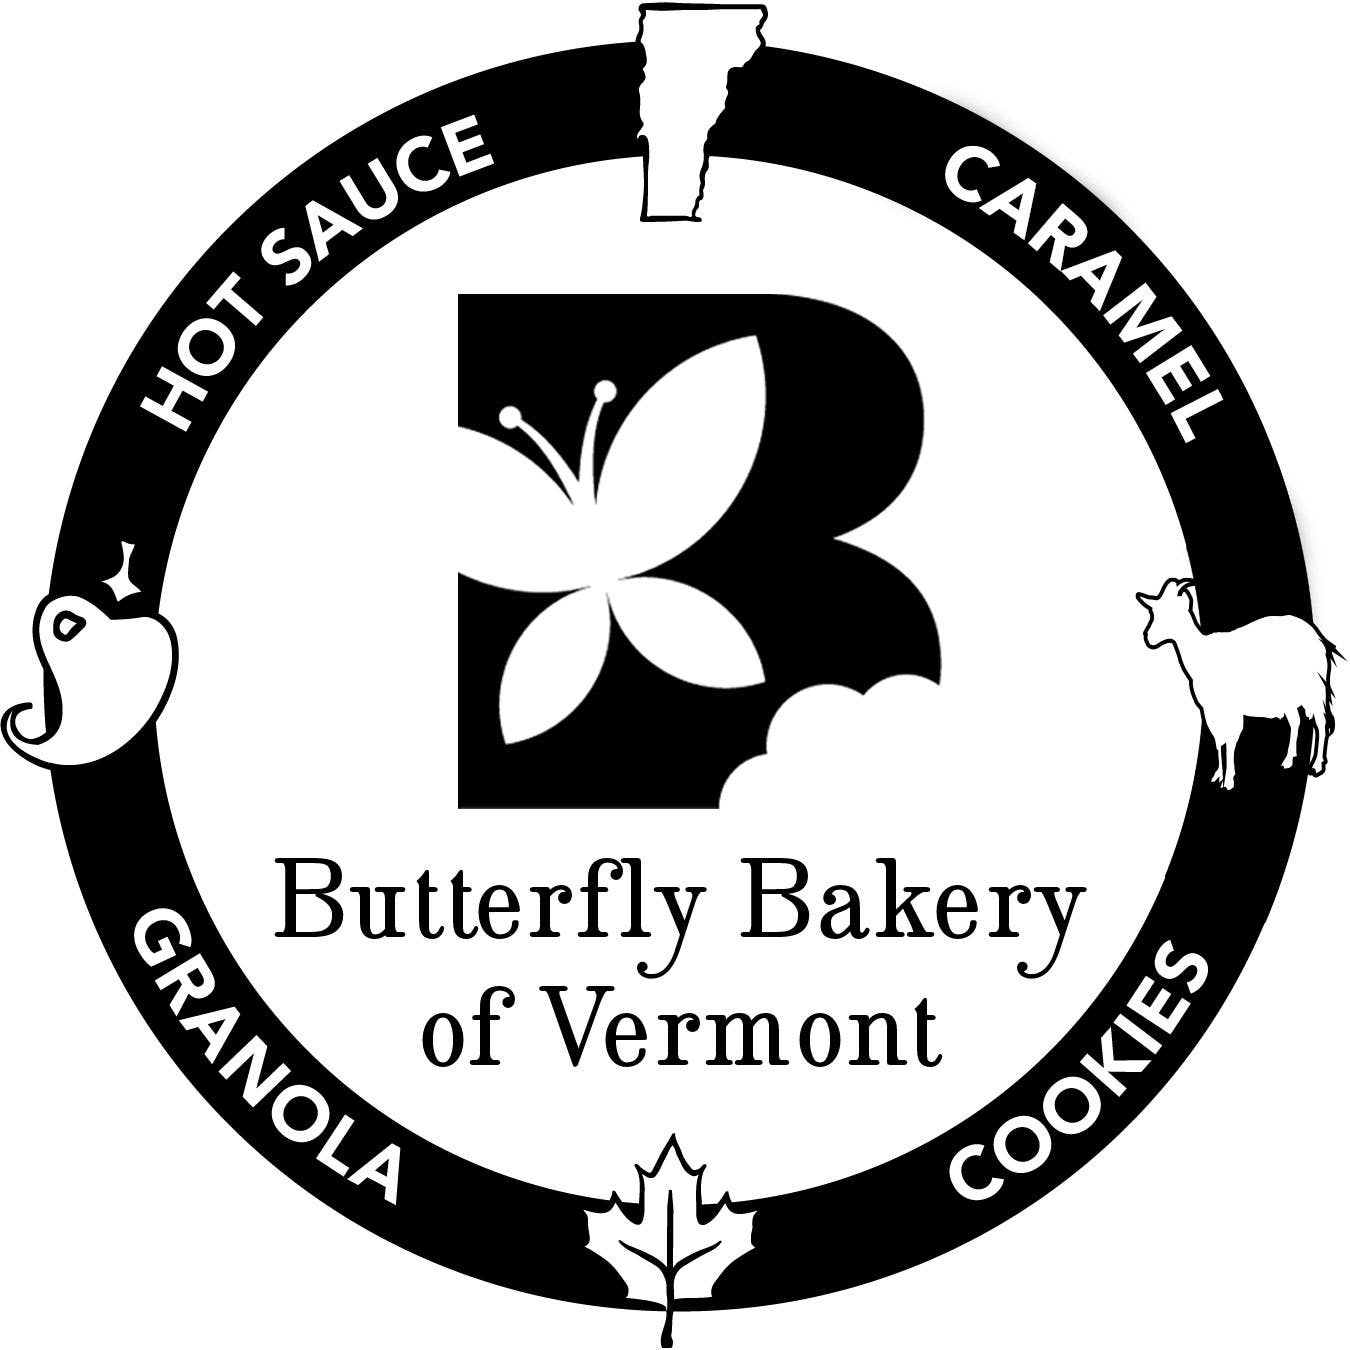 Vermont's Butterfly Bakery spices up new season of hit show 'Hot